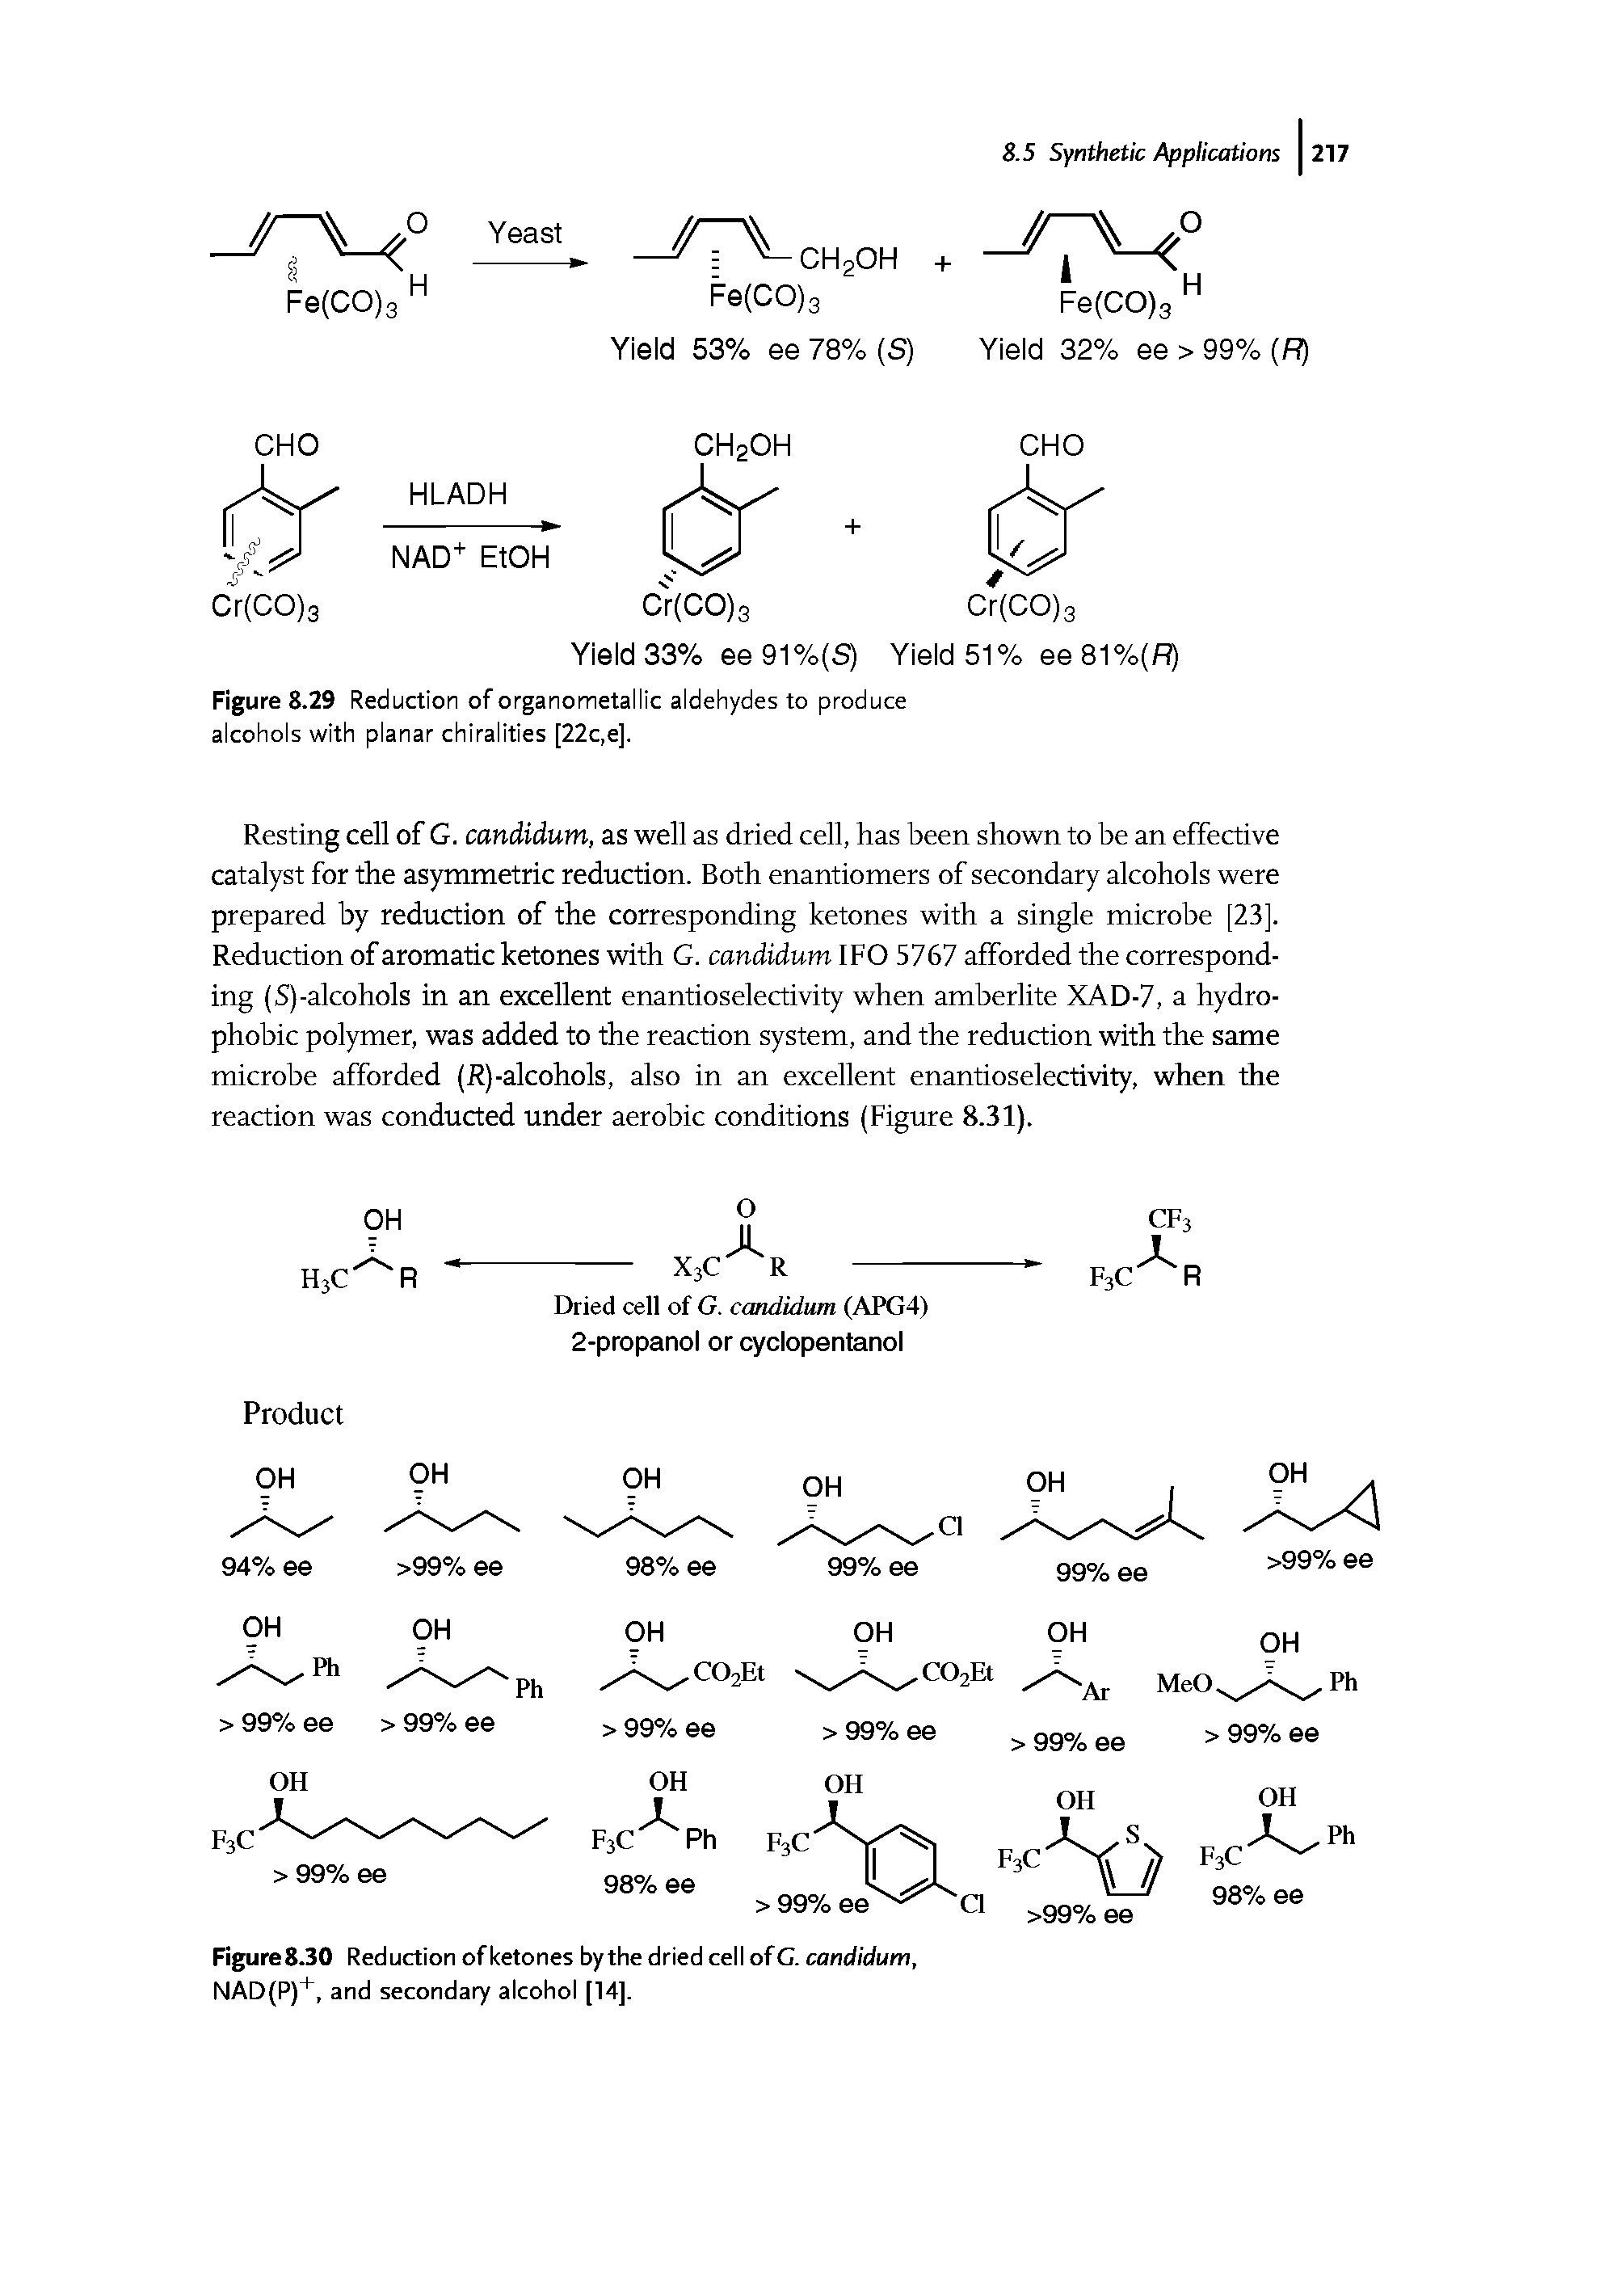 Figure 8.29 Reduction of organometallic aldehydes to produce alcohols with planar chiralities [22c,e].